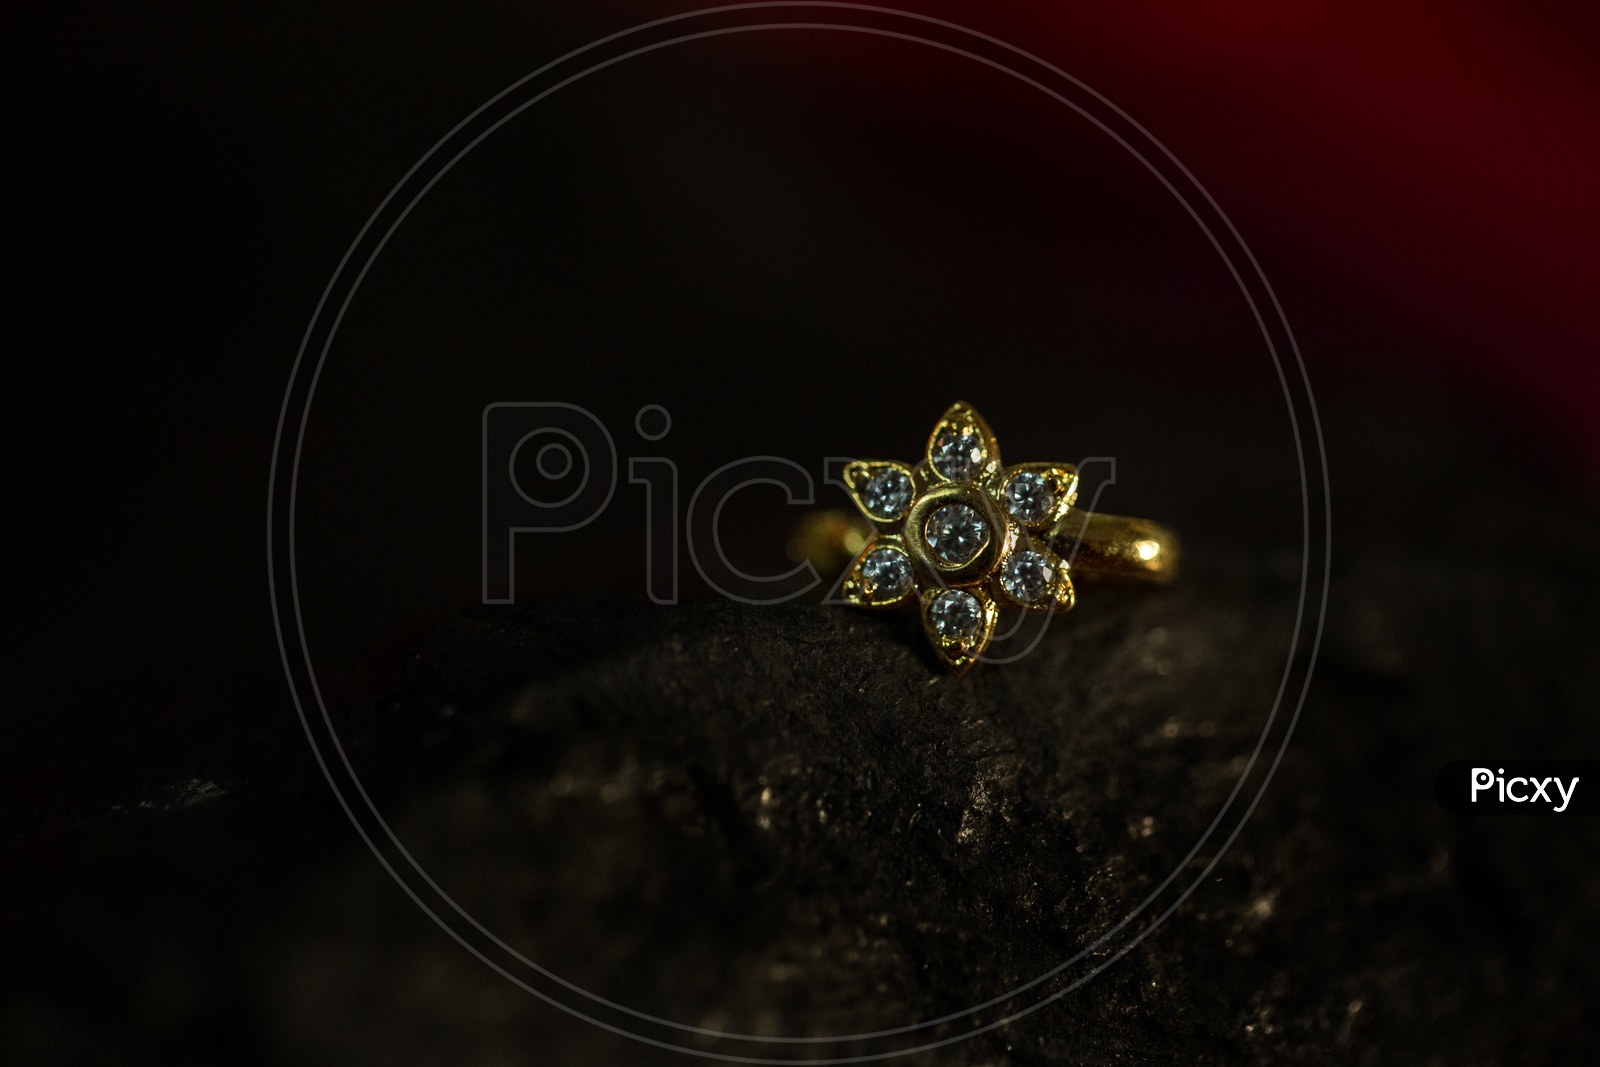 Indian  Made Ring With Diamond Stones in it Lotus Shaped / traditional Gold Ring Jewellery